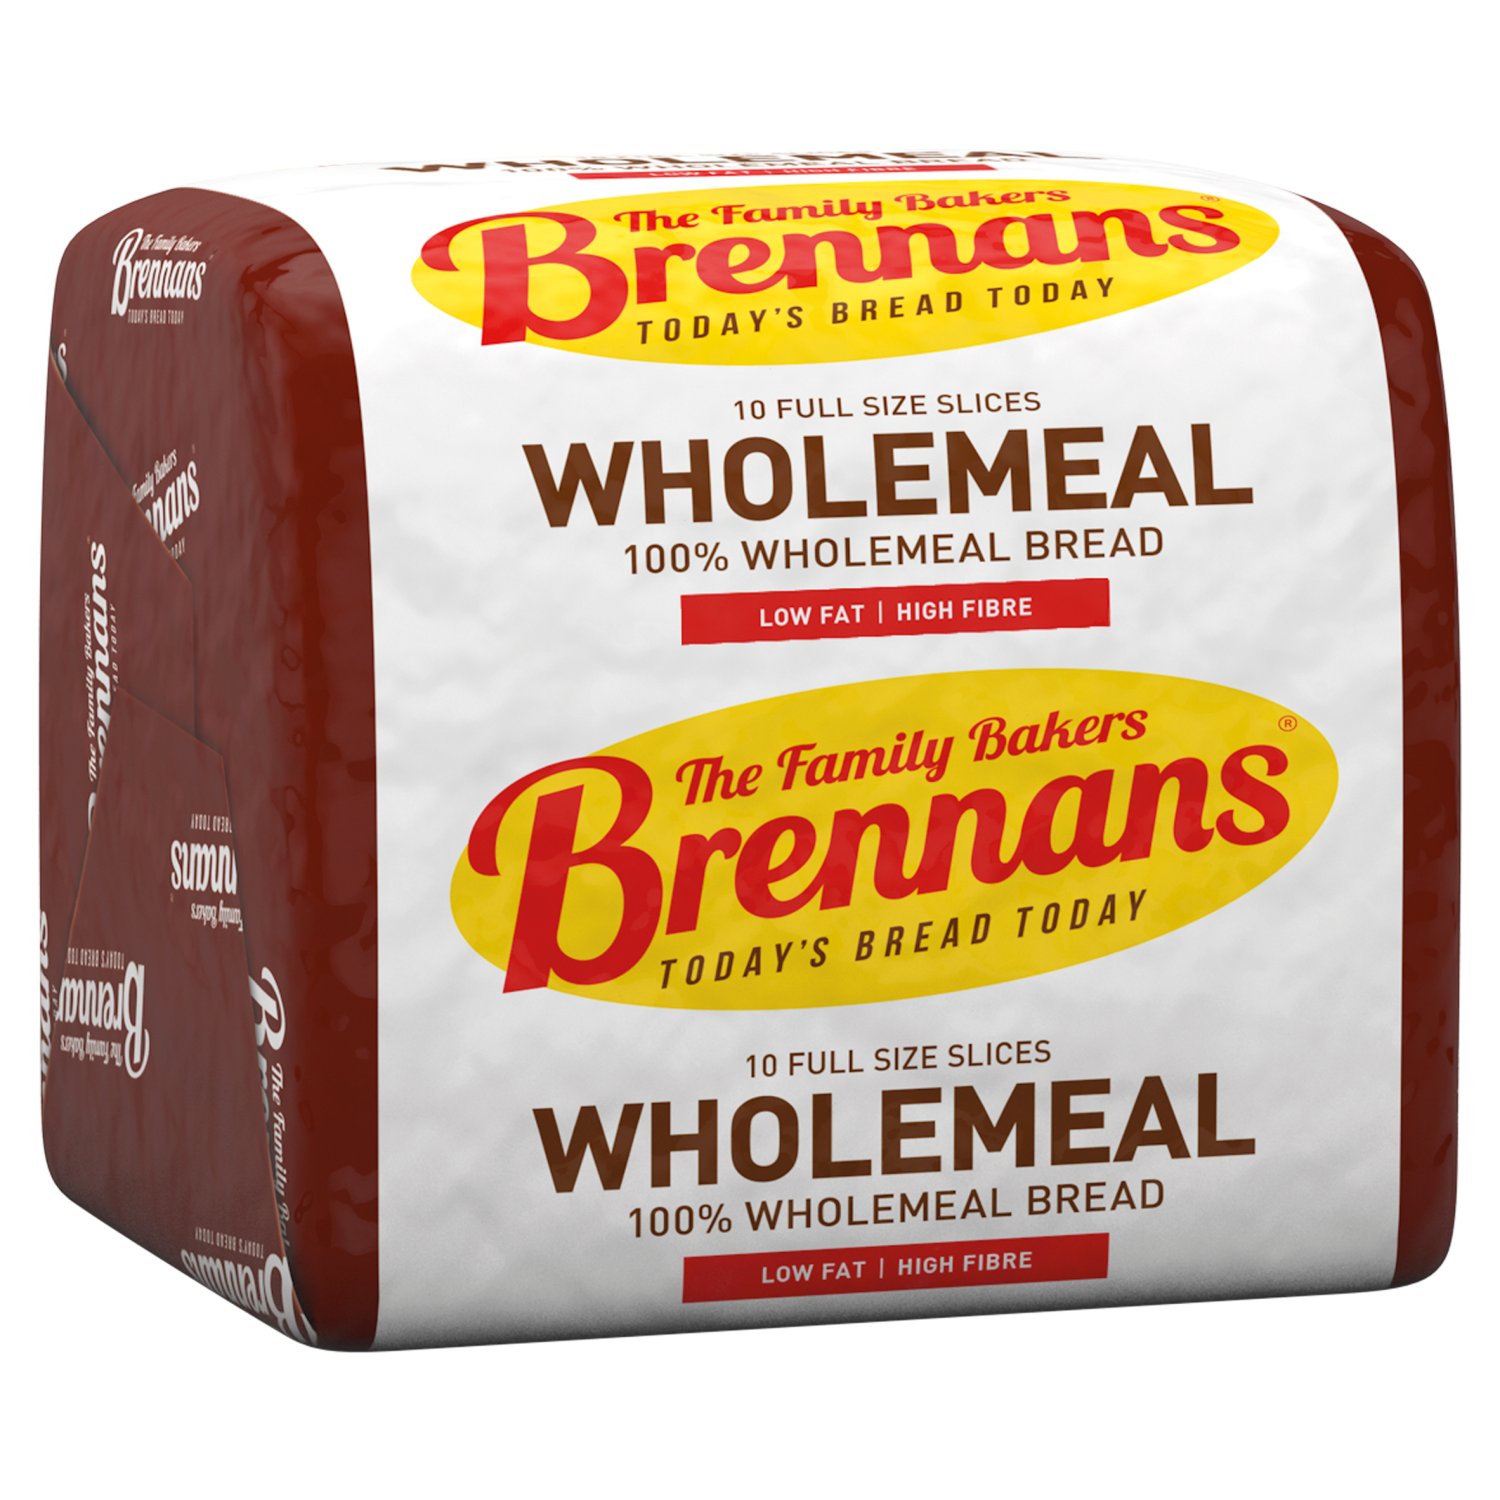 Our Guarantee
At Brennans Family Bakery we guarantee our breads' freshness and quality. Made from the finest ingredients and baked with special care, it comes hot from our ovens to reach each shelf within hours, so you can be sure it's today's bread today.
Joe Brennan